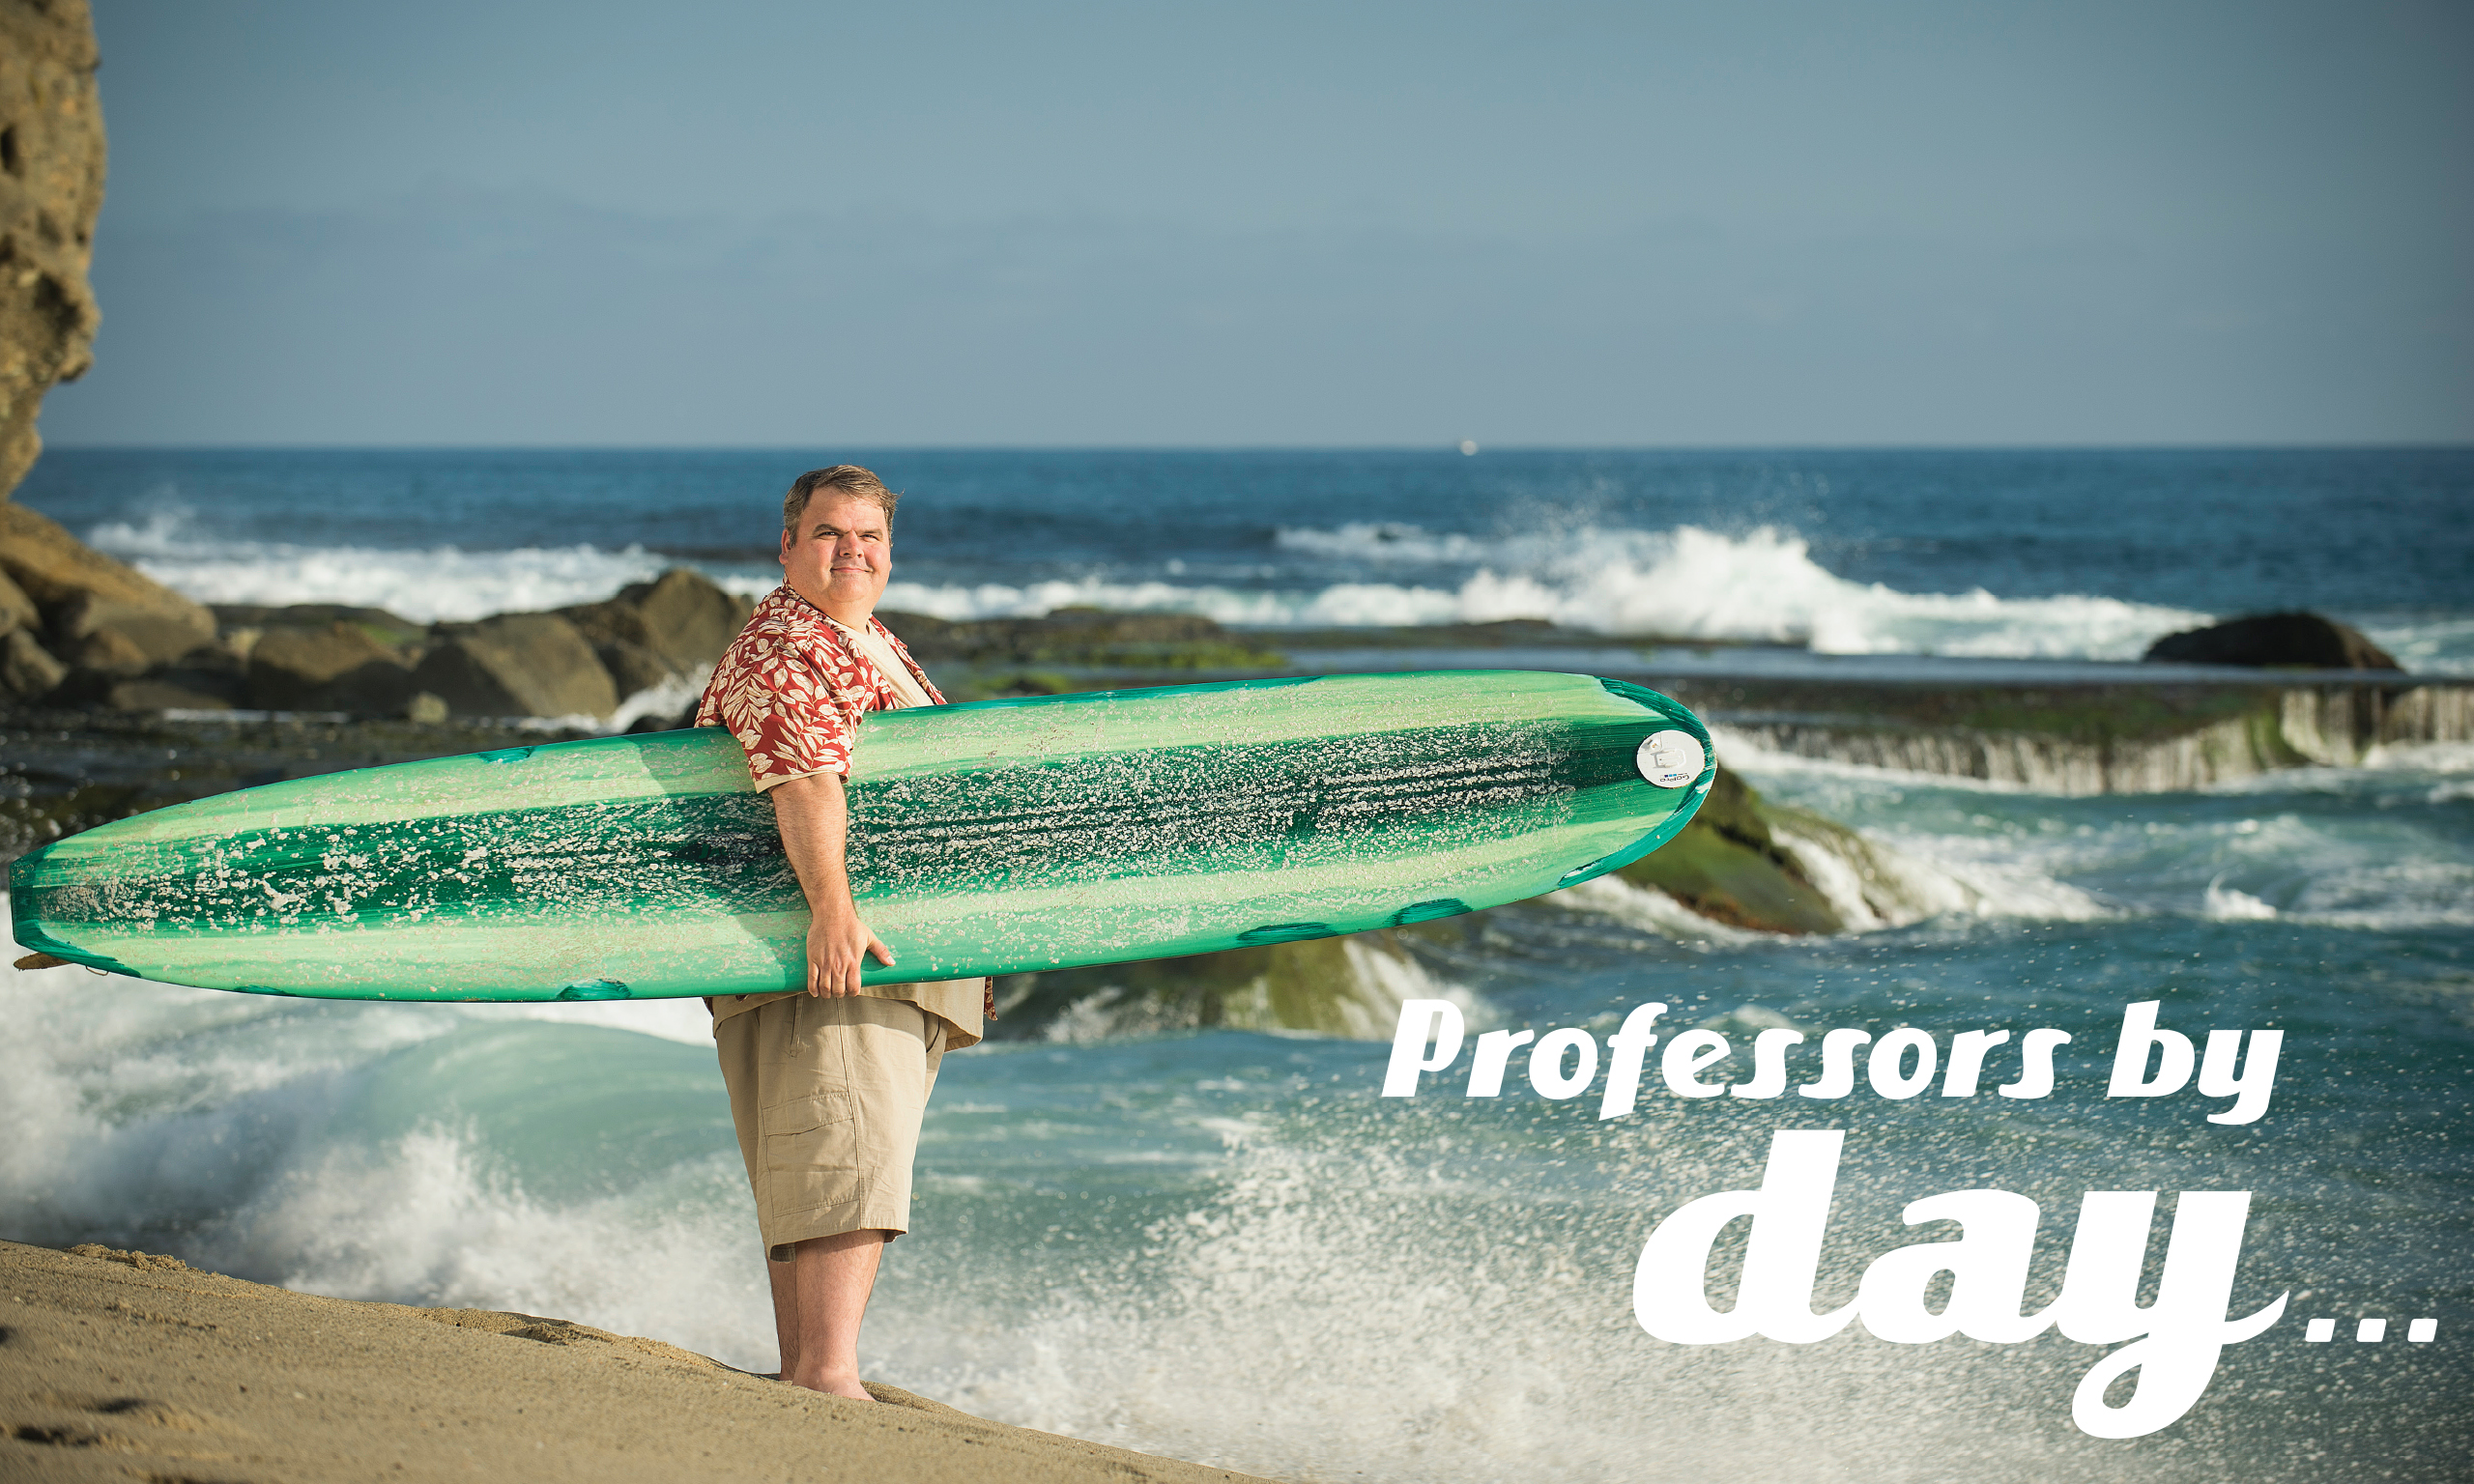 Mark Wright holds a long surfboard on the beach with the title "Professors by Day"